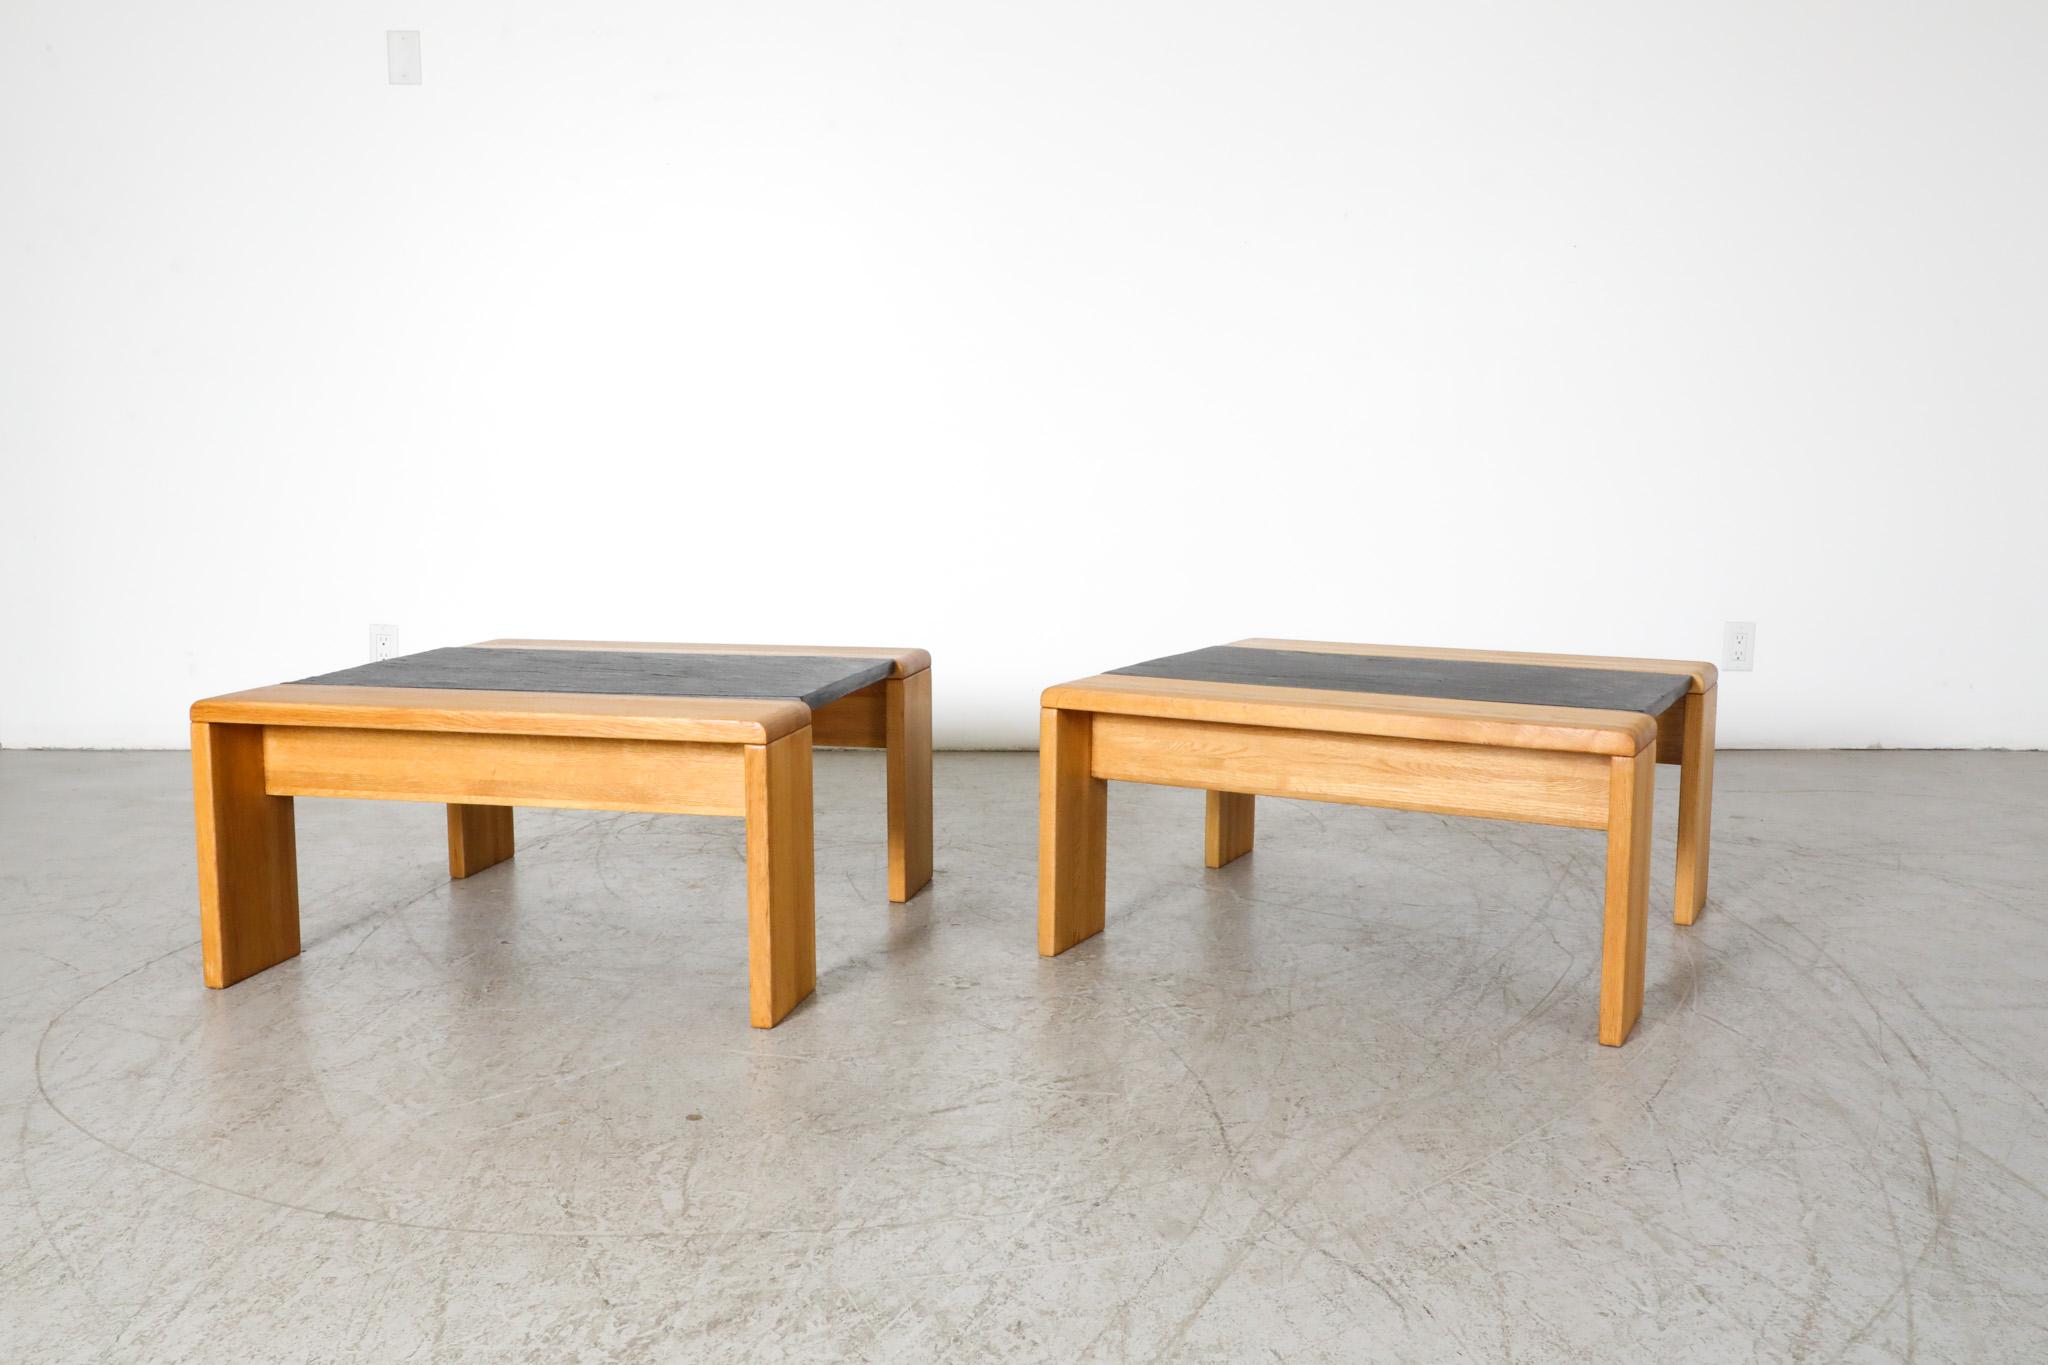 Dutch Pair of Tobia Scarpa Inspired Teak and Stone Coffee and side Tables by Leolux